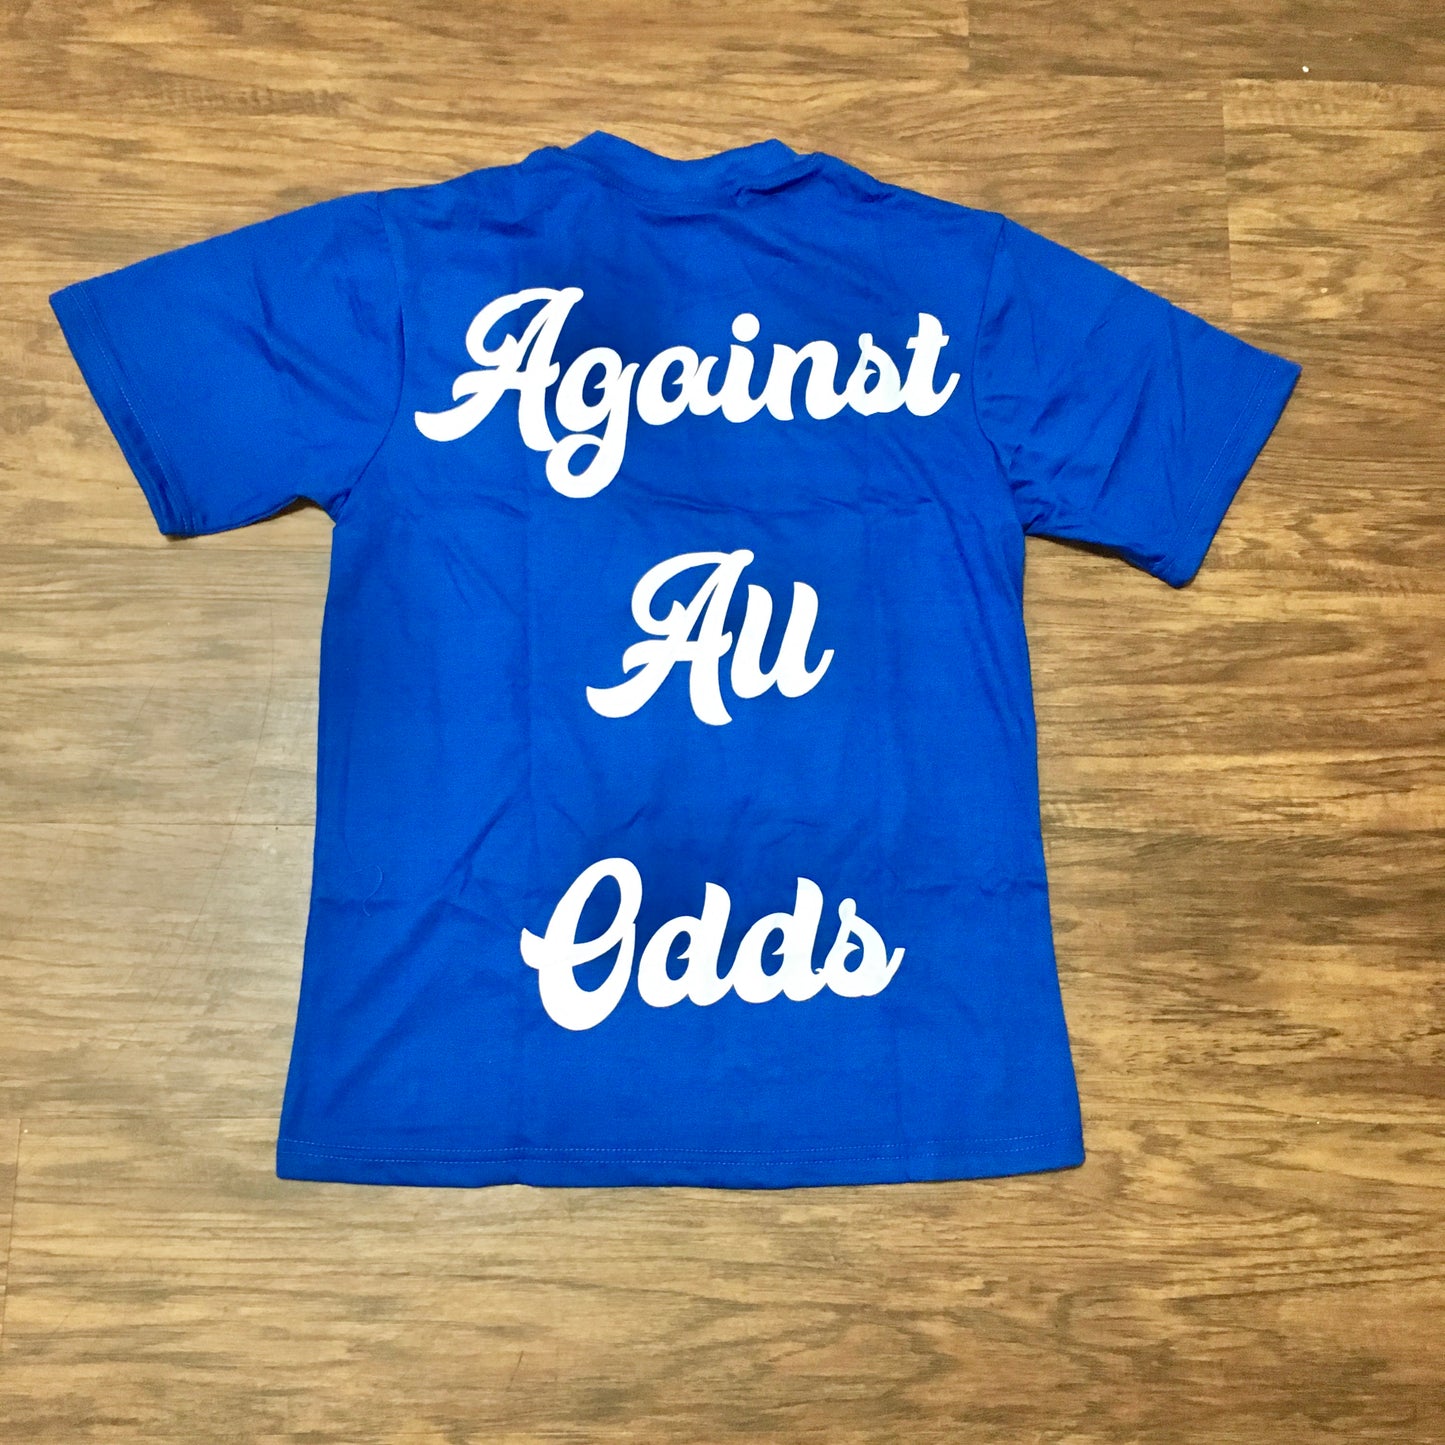 (Heavy Against All Odds T shirt set)